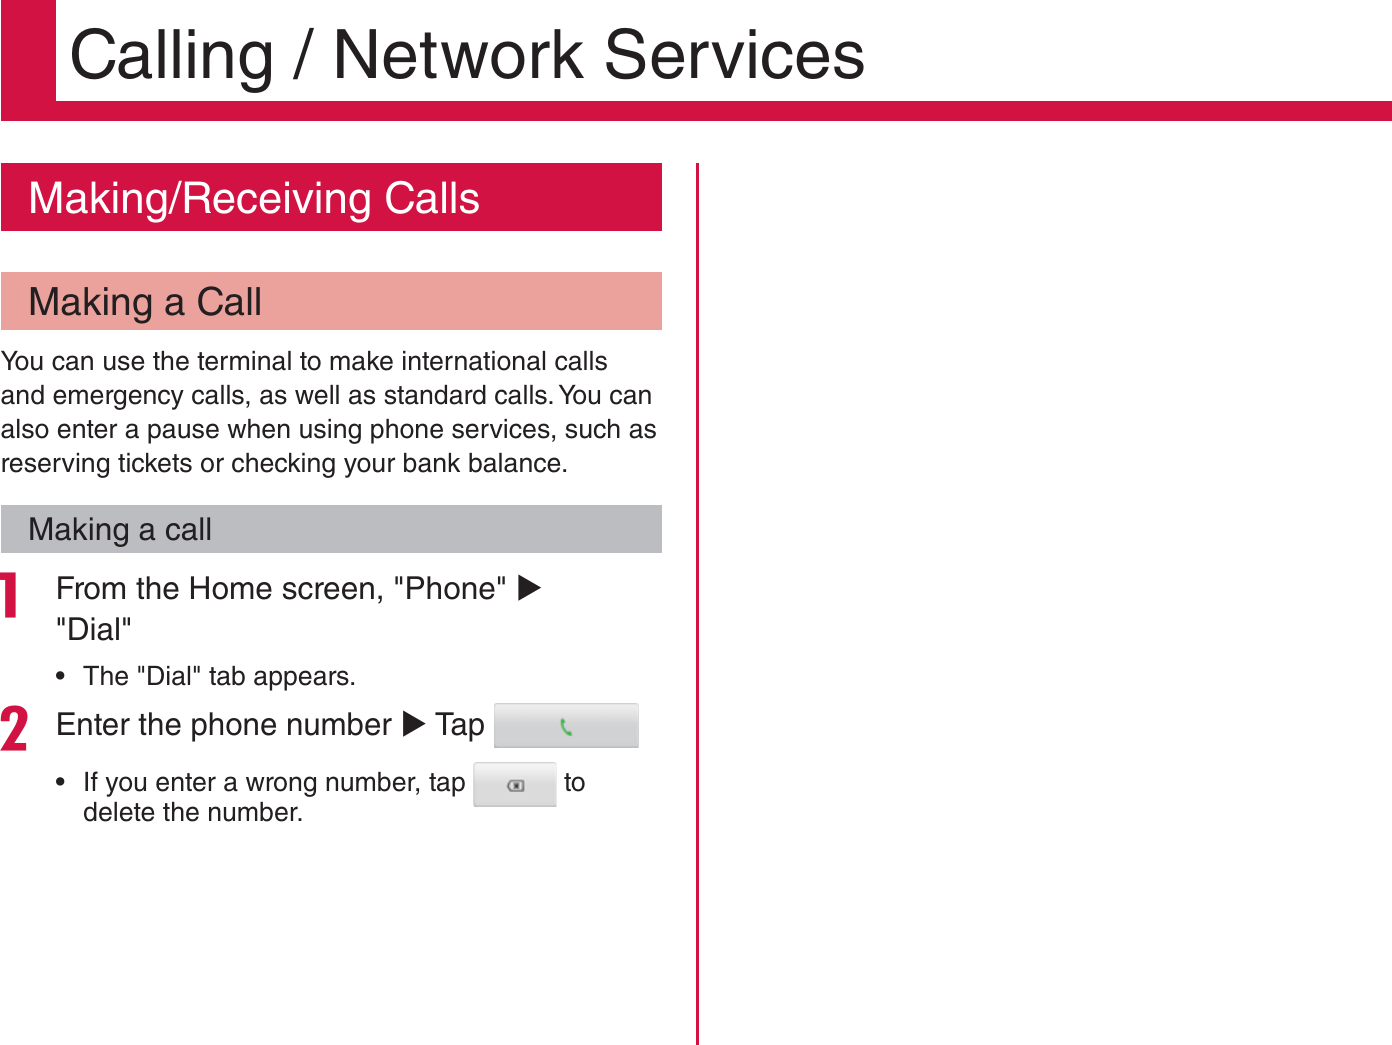 Calling / Network ServicesMaking/Receiving CallsMaking a CallYou can use the terminal to make international calls and emergency calls, as well as standard calls. You can also enter a pause when using phone services, such as reserving tickets or checking your bank balance.Making a call From the Home screen, &quot;Phone&quot; X &quot;Dial&quot;   rThe &quot;Dial&quot; tab appears.Enter the phone number X Tap  rIf you enter a wrong number, tap   to delete the number.78Calling / Network Services